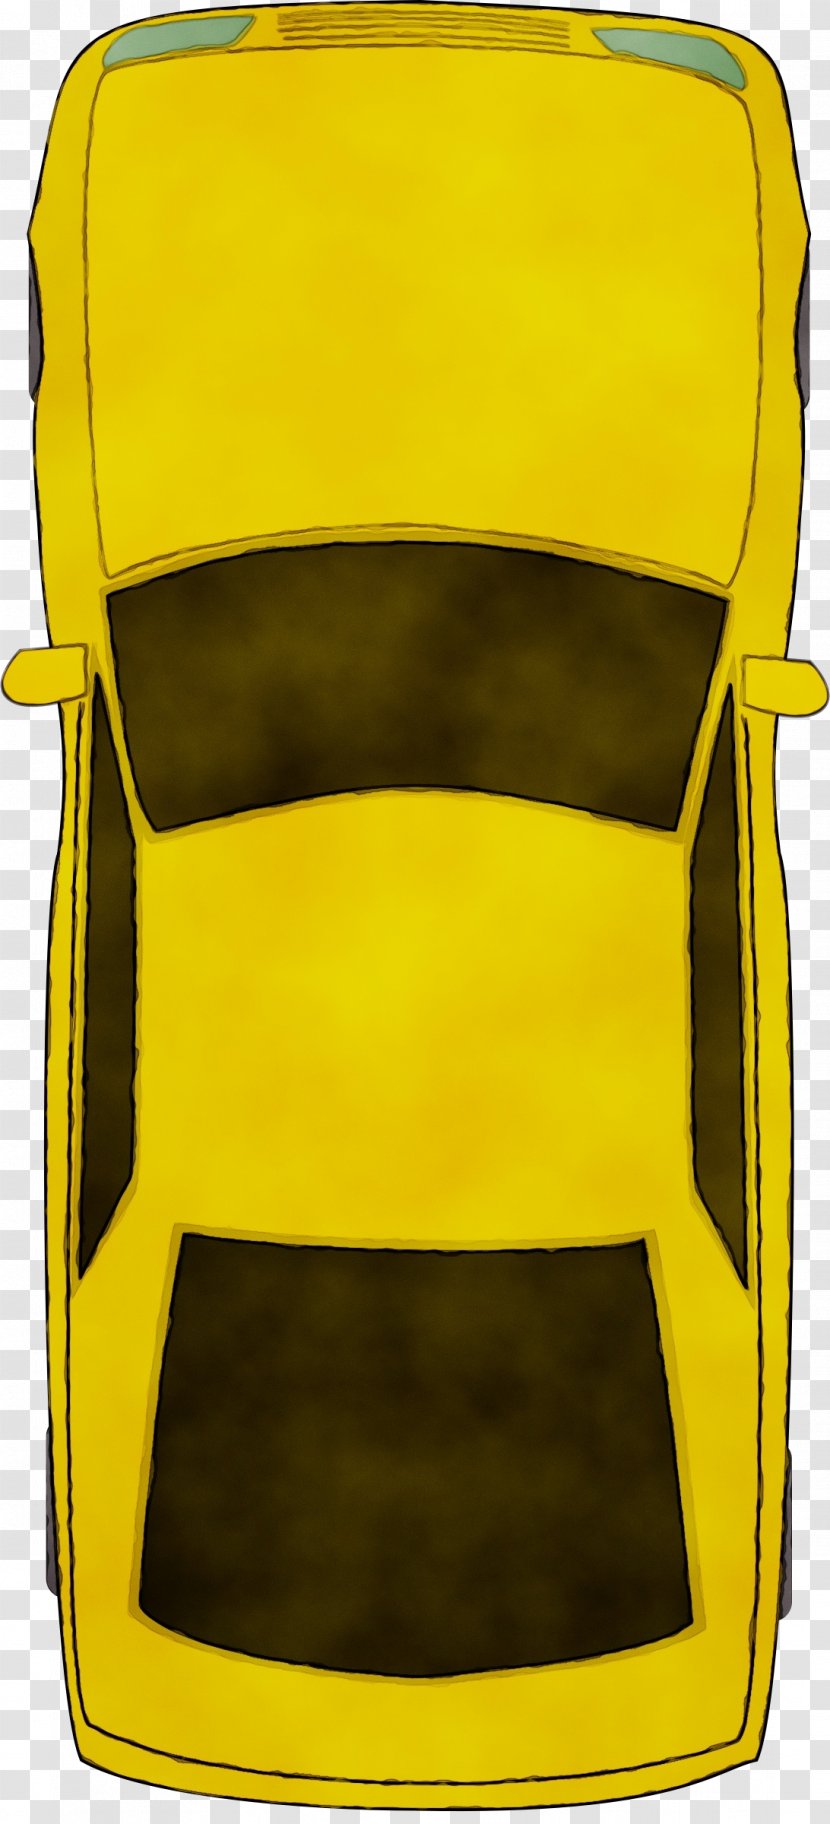 Watercolor Cartoon - Wet Ink - Chair Yellow Transparent PNG